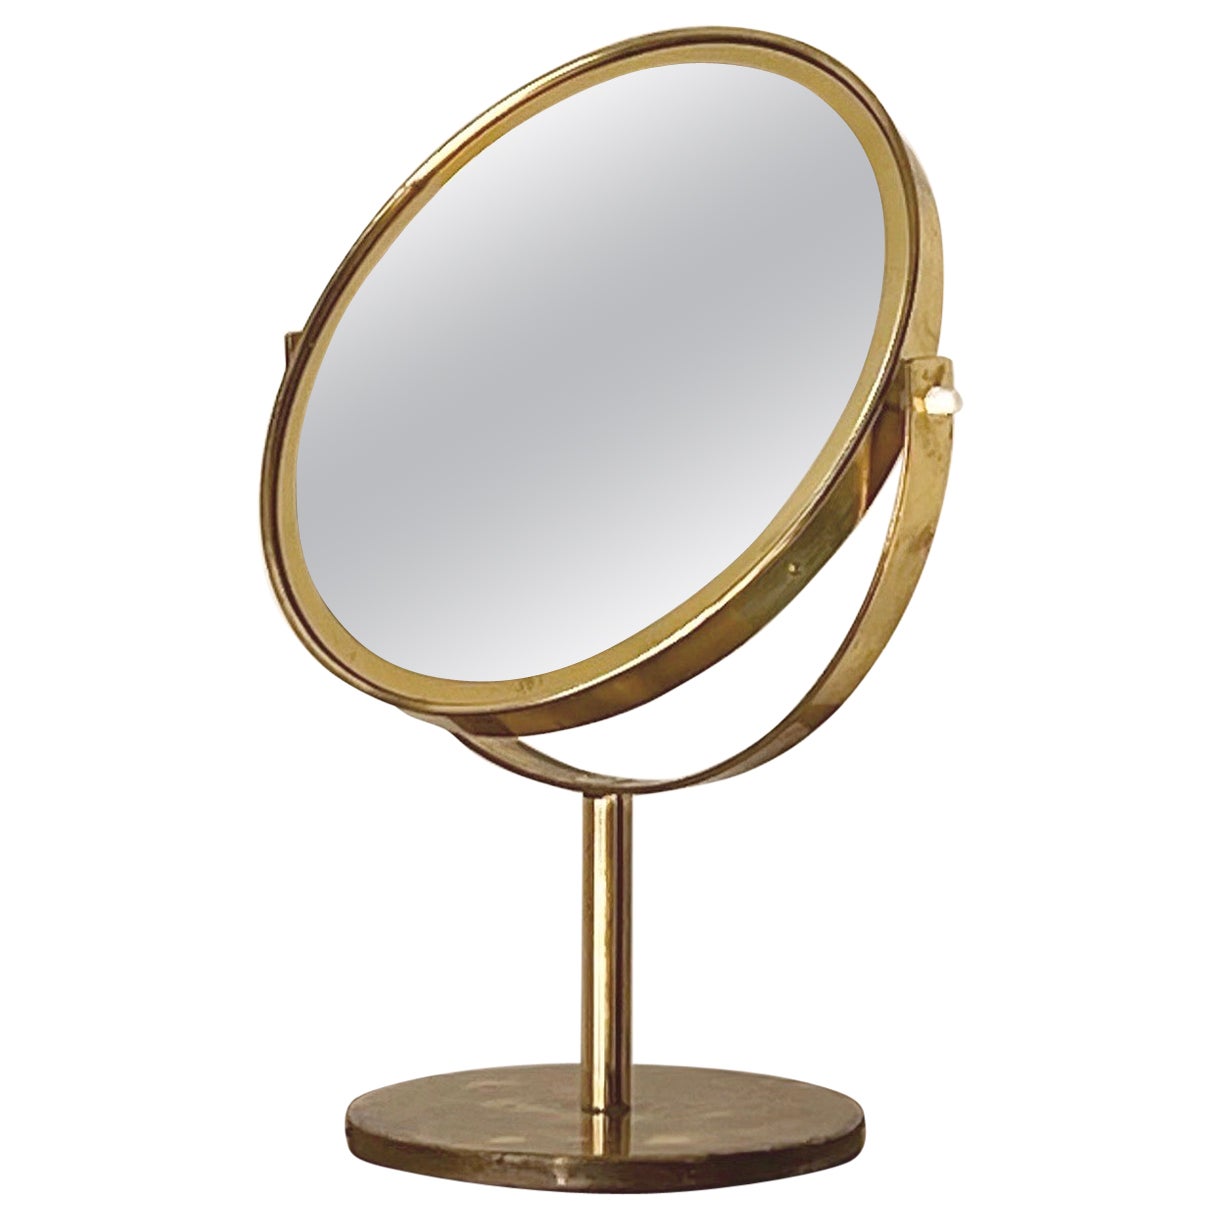 Mid-20th Century Brass Table Mirror by Hans Agne Jakobsson, Sweden For Sale